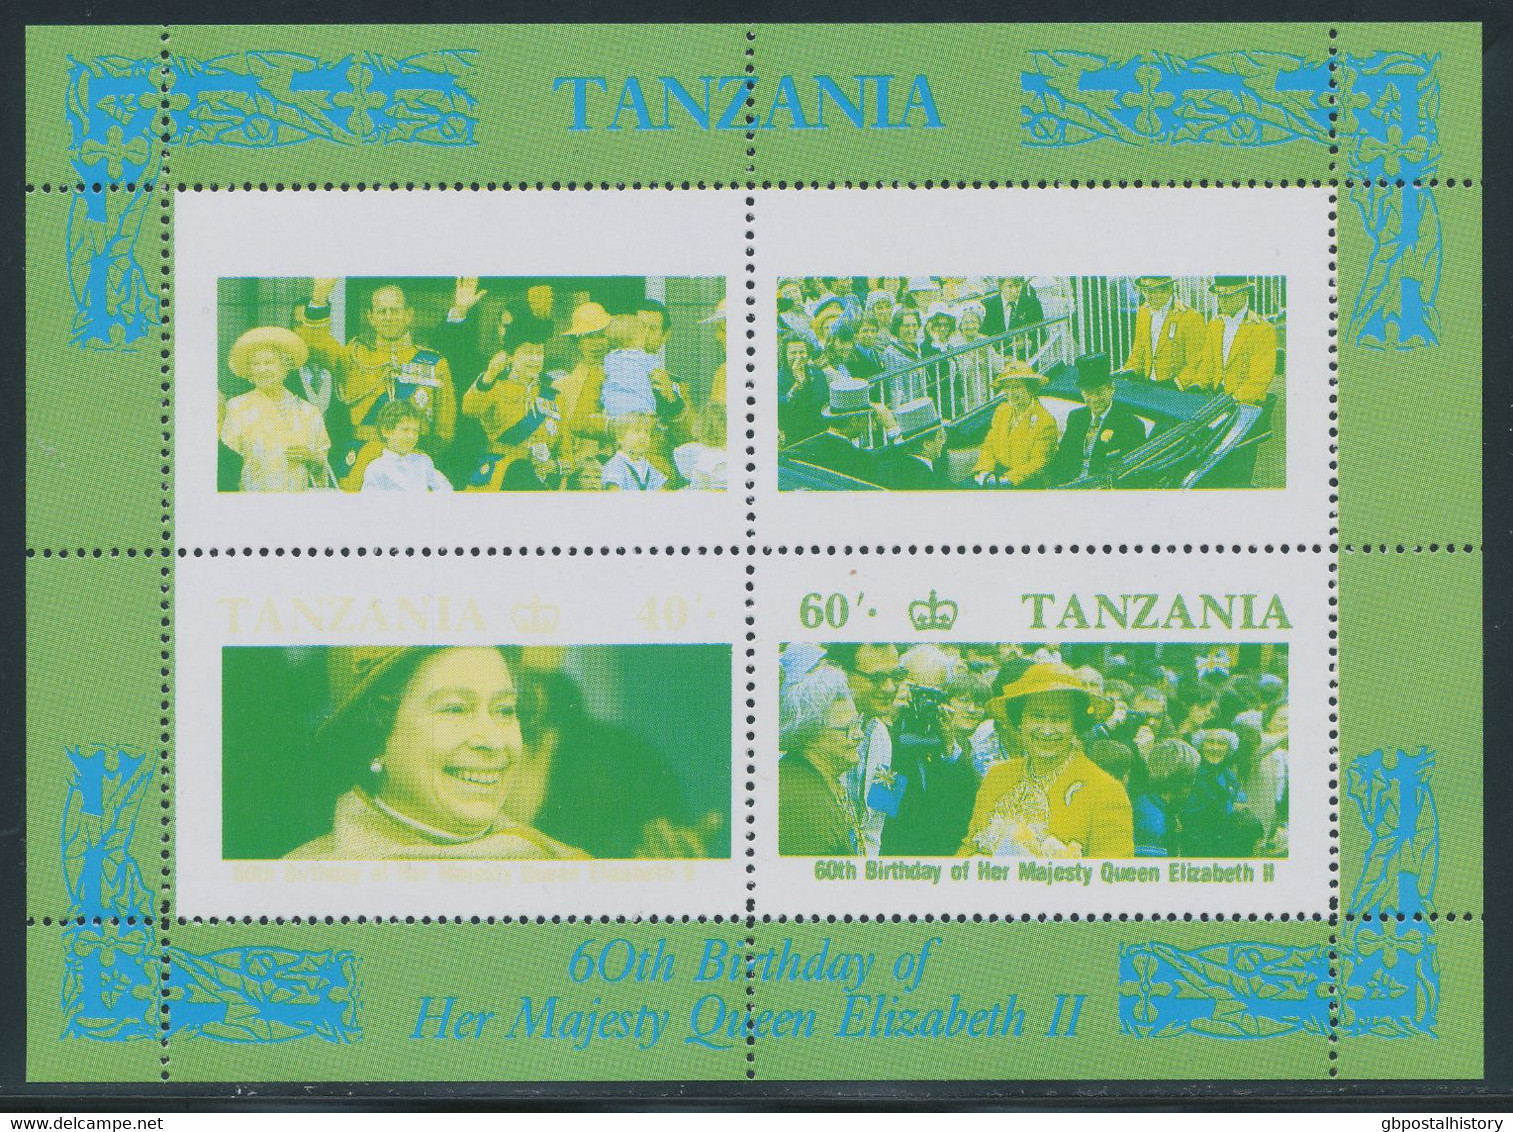 TANZANIA 1987, 60th Birthday Of Queen Elizabeth II, MAJOR VARIETY: Superb U/M MS With MISSING COLORS Red And Black, - Tansania (1964-...)